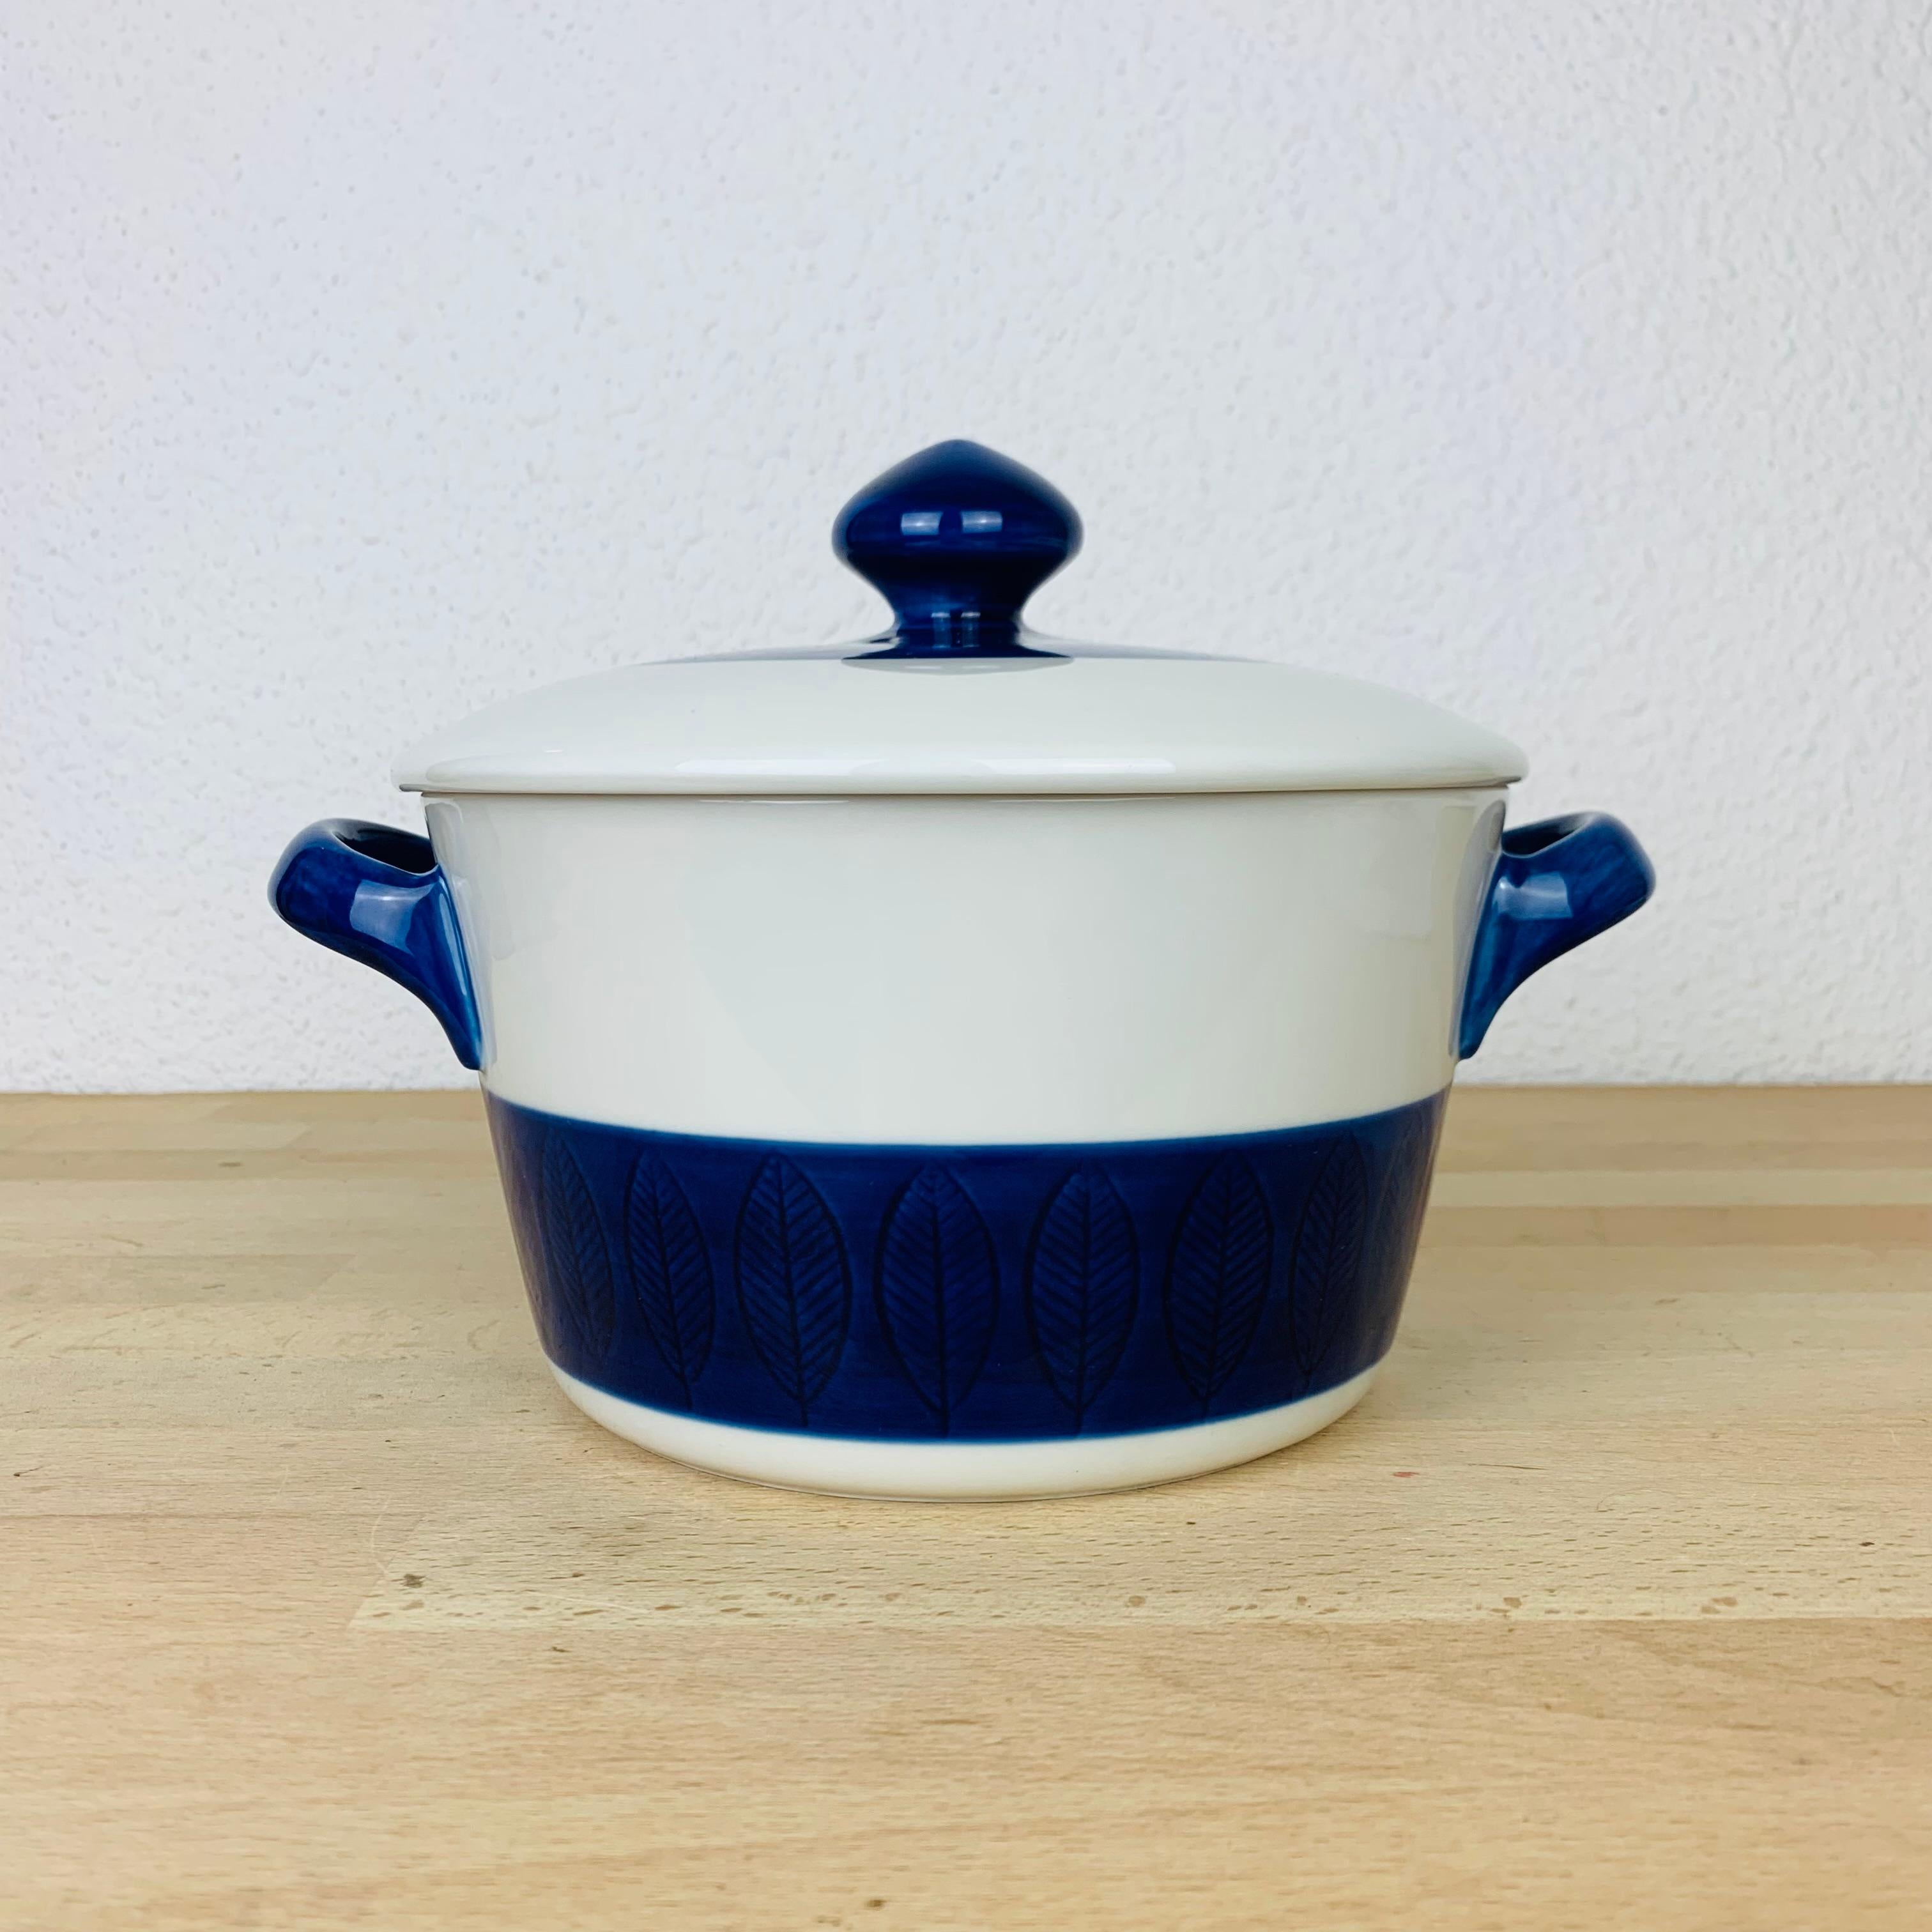 Koka soup tureen by Hertha Bengtson for Rörstrand Sweden, manufactured in the 1960's. 

Slight wear due to its age and use, no chip, no crack. 

Measurements : diameter 19, 5 cm, height 17, 5 cm, height without lid 11 cm, total width 25 cm.